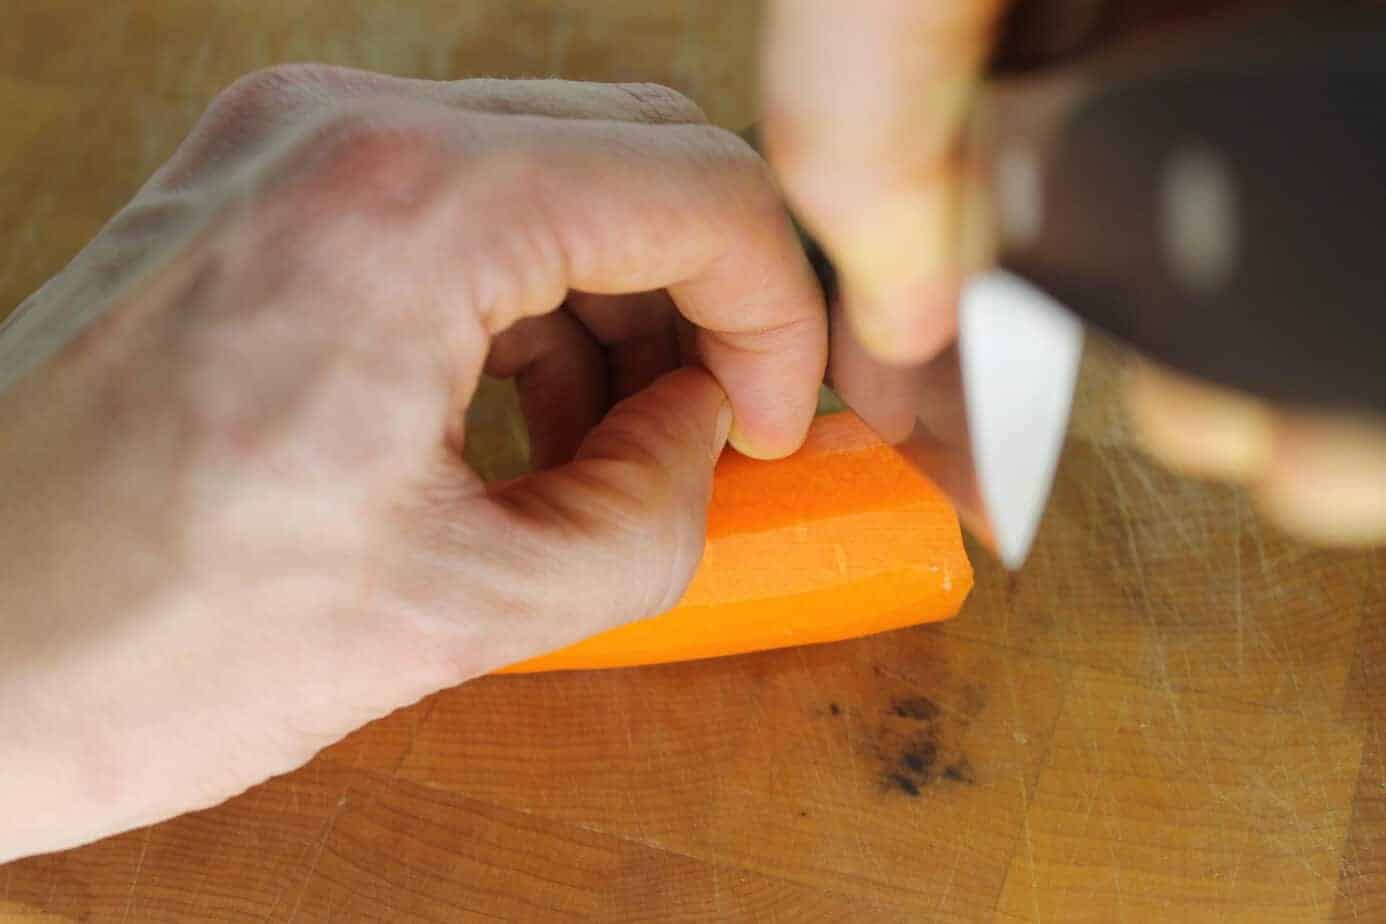 Curling your fingers in like this will ensure that you never cut yourself, the blade slides along your knuckle but the cutting edge is never close to your finger tips.